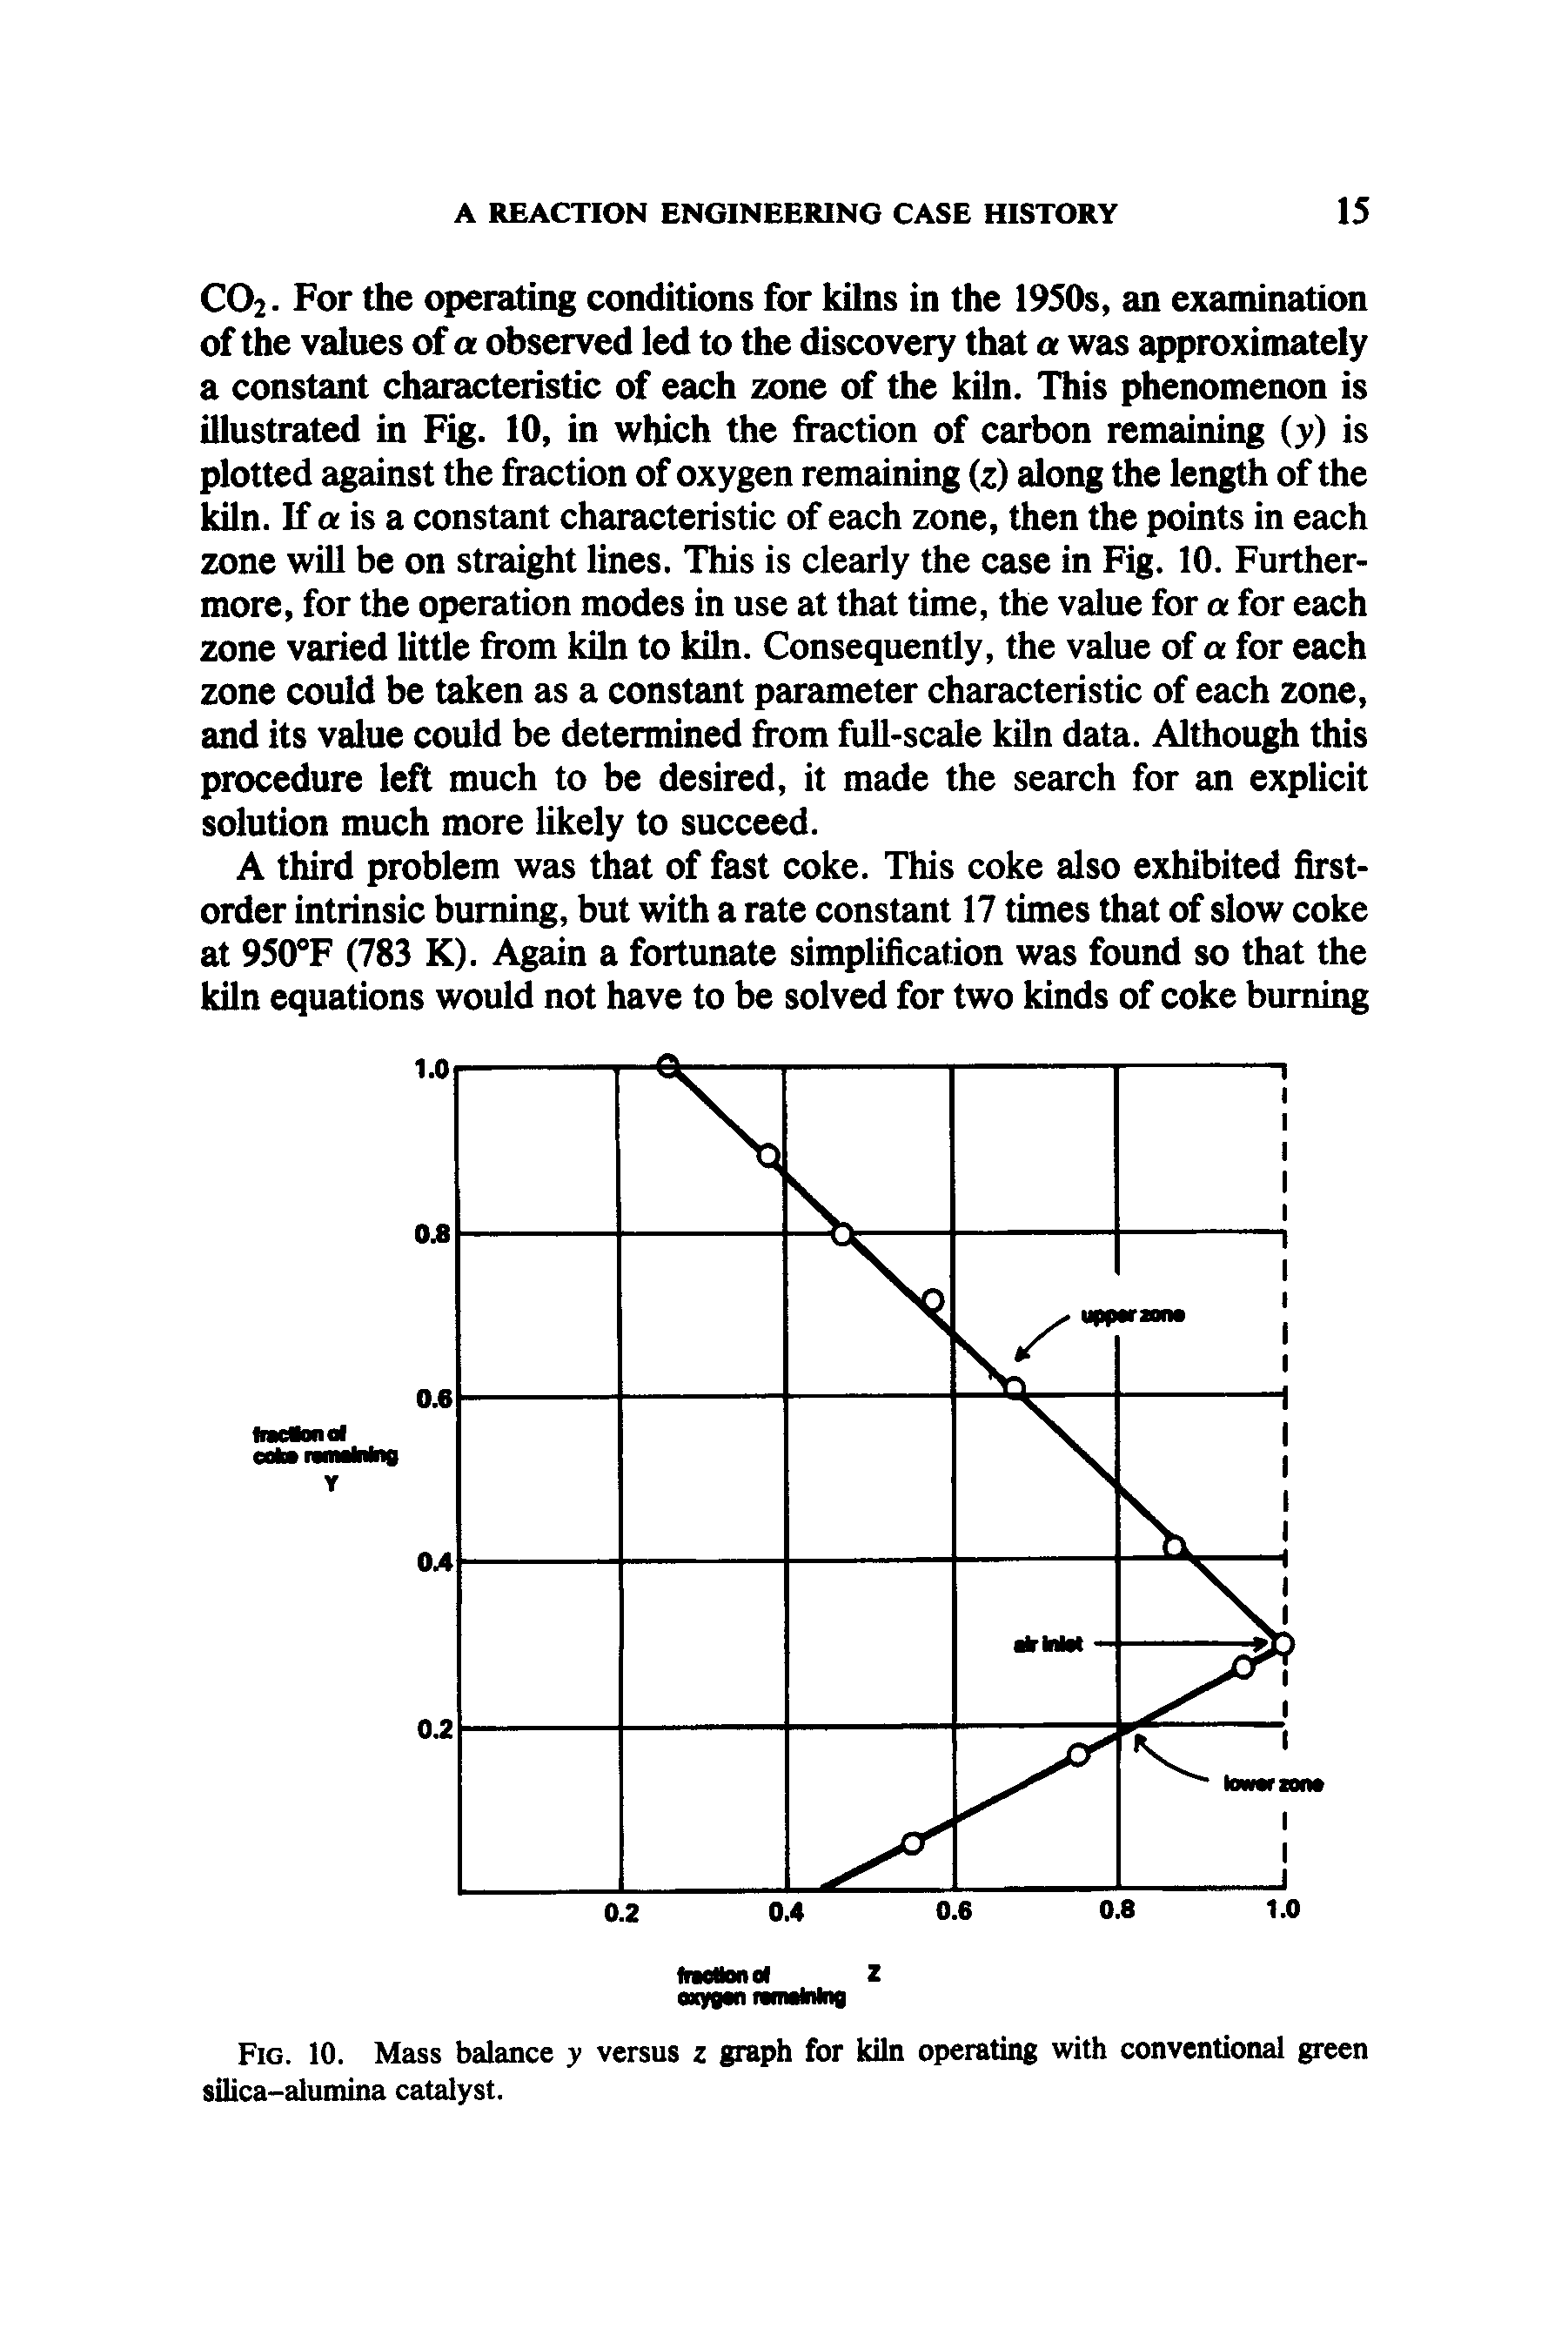 Fig. 10. Mass balance y versus z graph for kiln operating with conventional green silica-alumina catalyst.